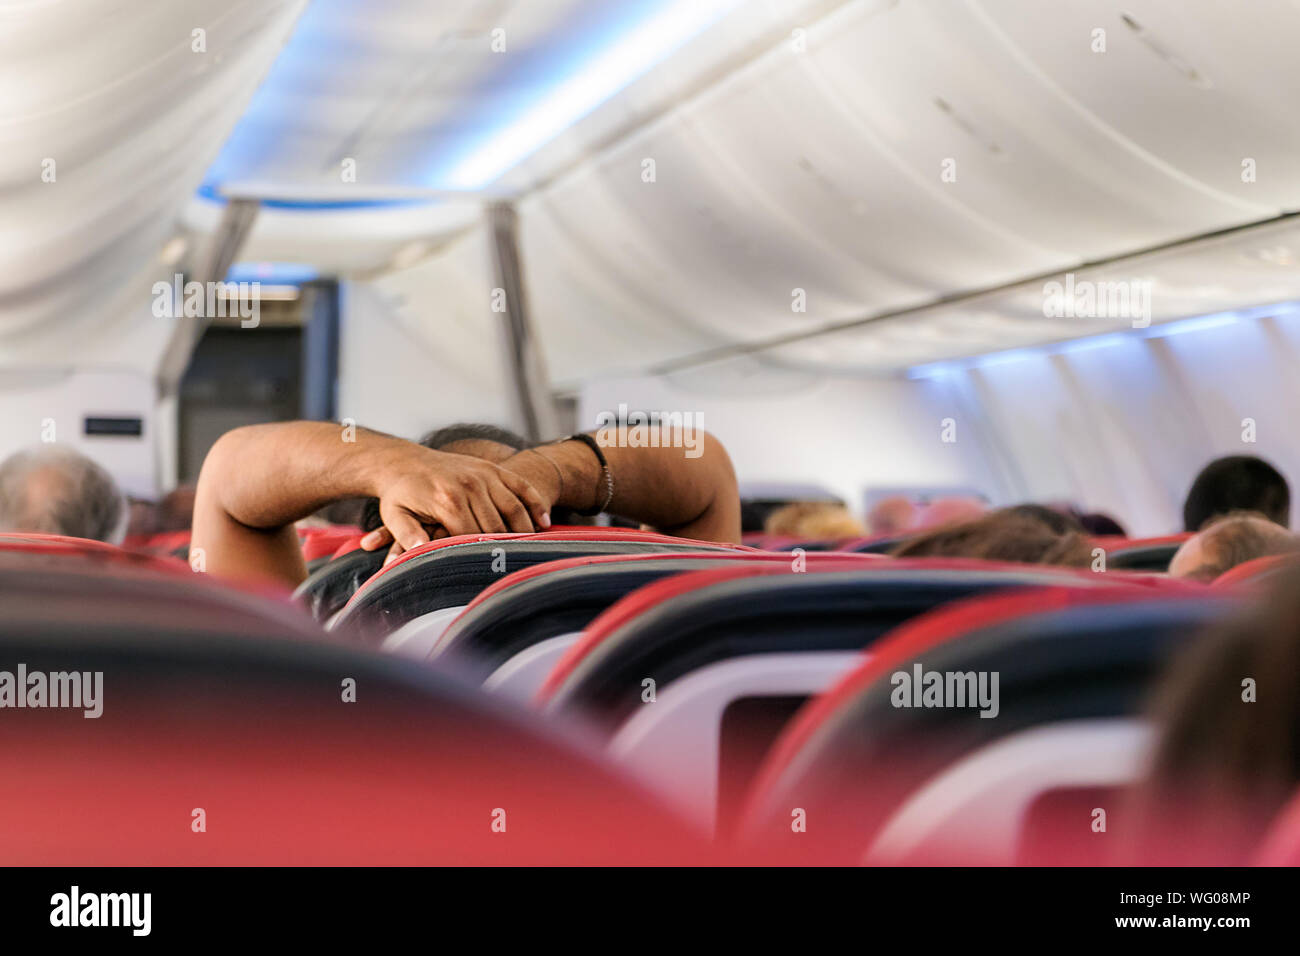 The arms and hands of a passenger watching a movie or resting in the economy cabin class of an airplane flying. Stock Photo